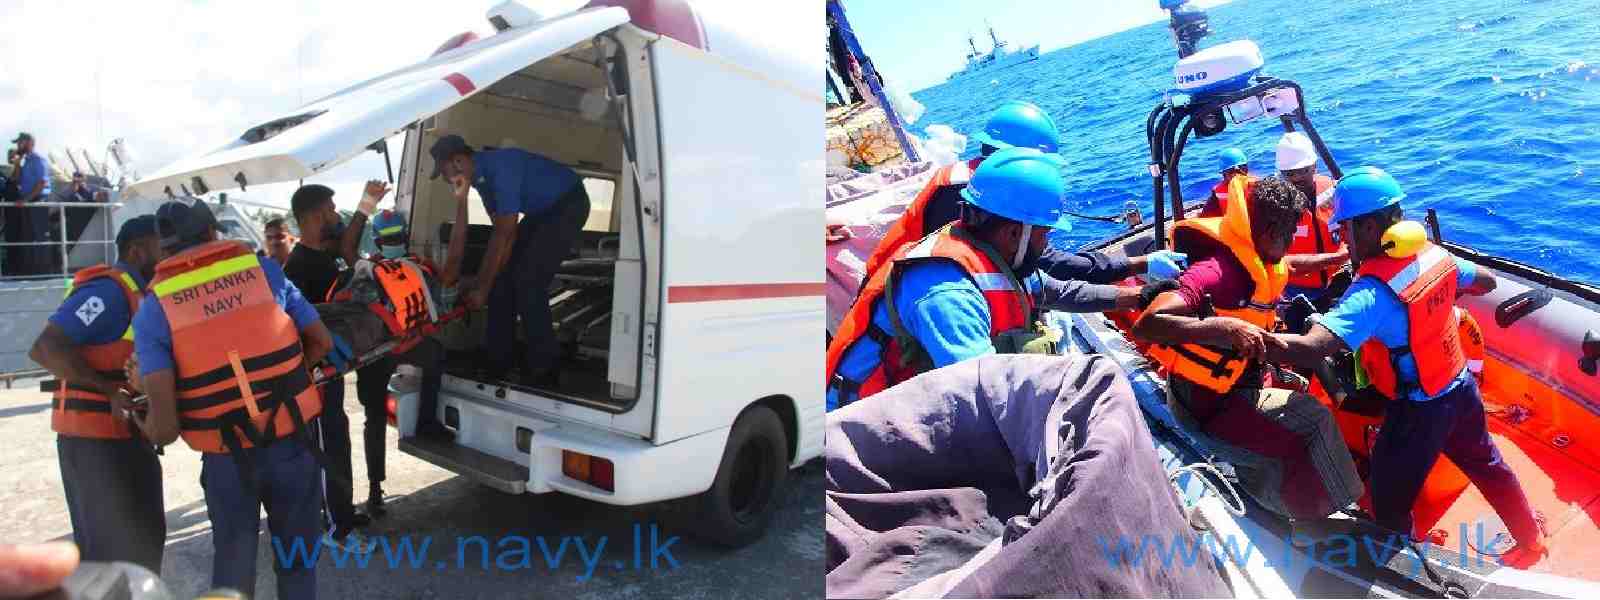 Navy brings ill fisherman ashore for immediate treatment from high seas